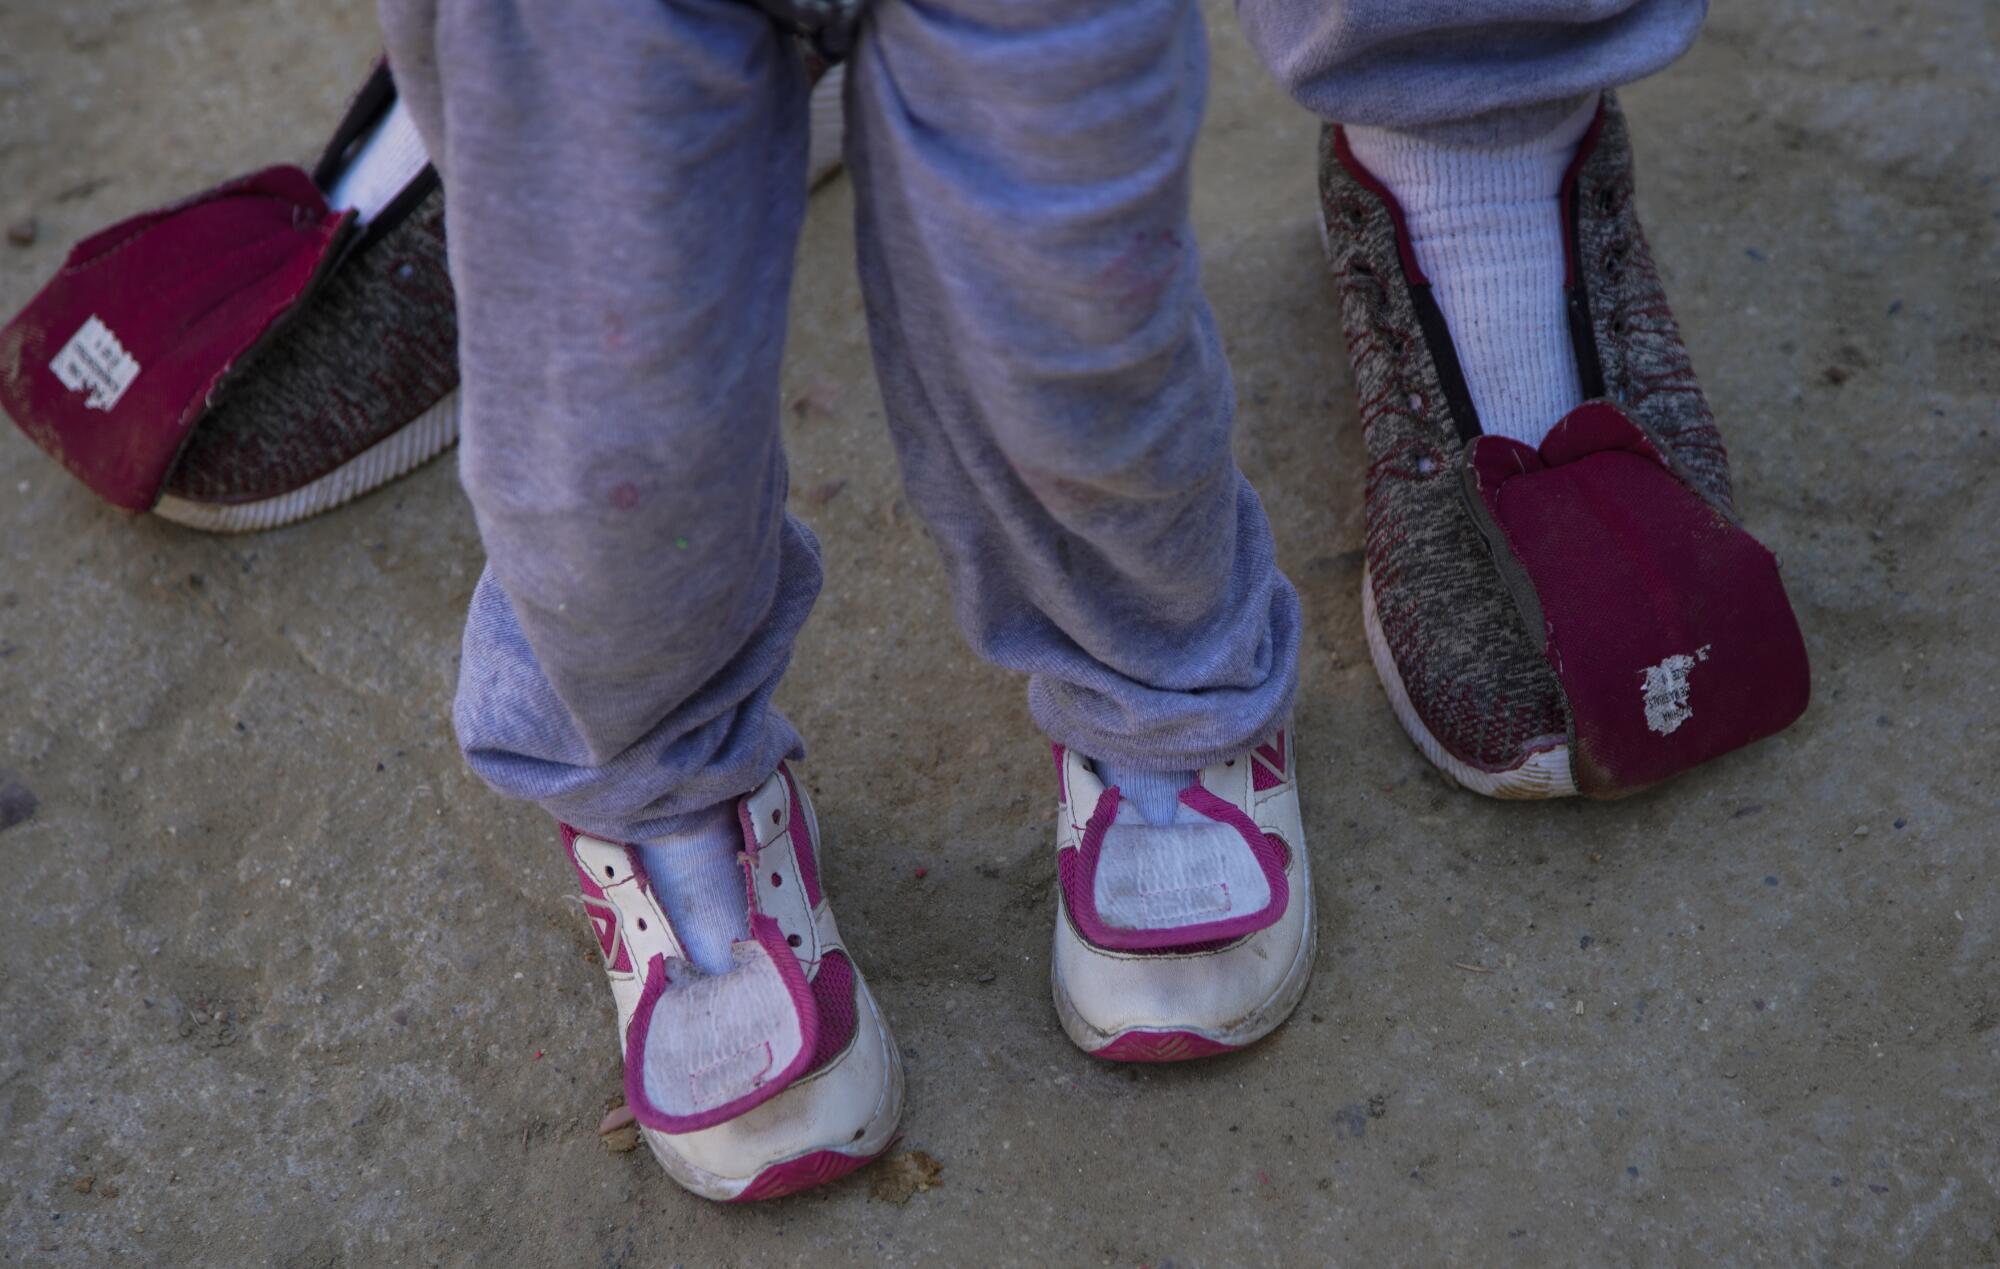 Asylum seekers arriving at the shelter come without shoelaces.